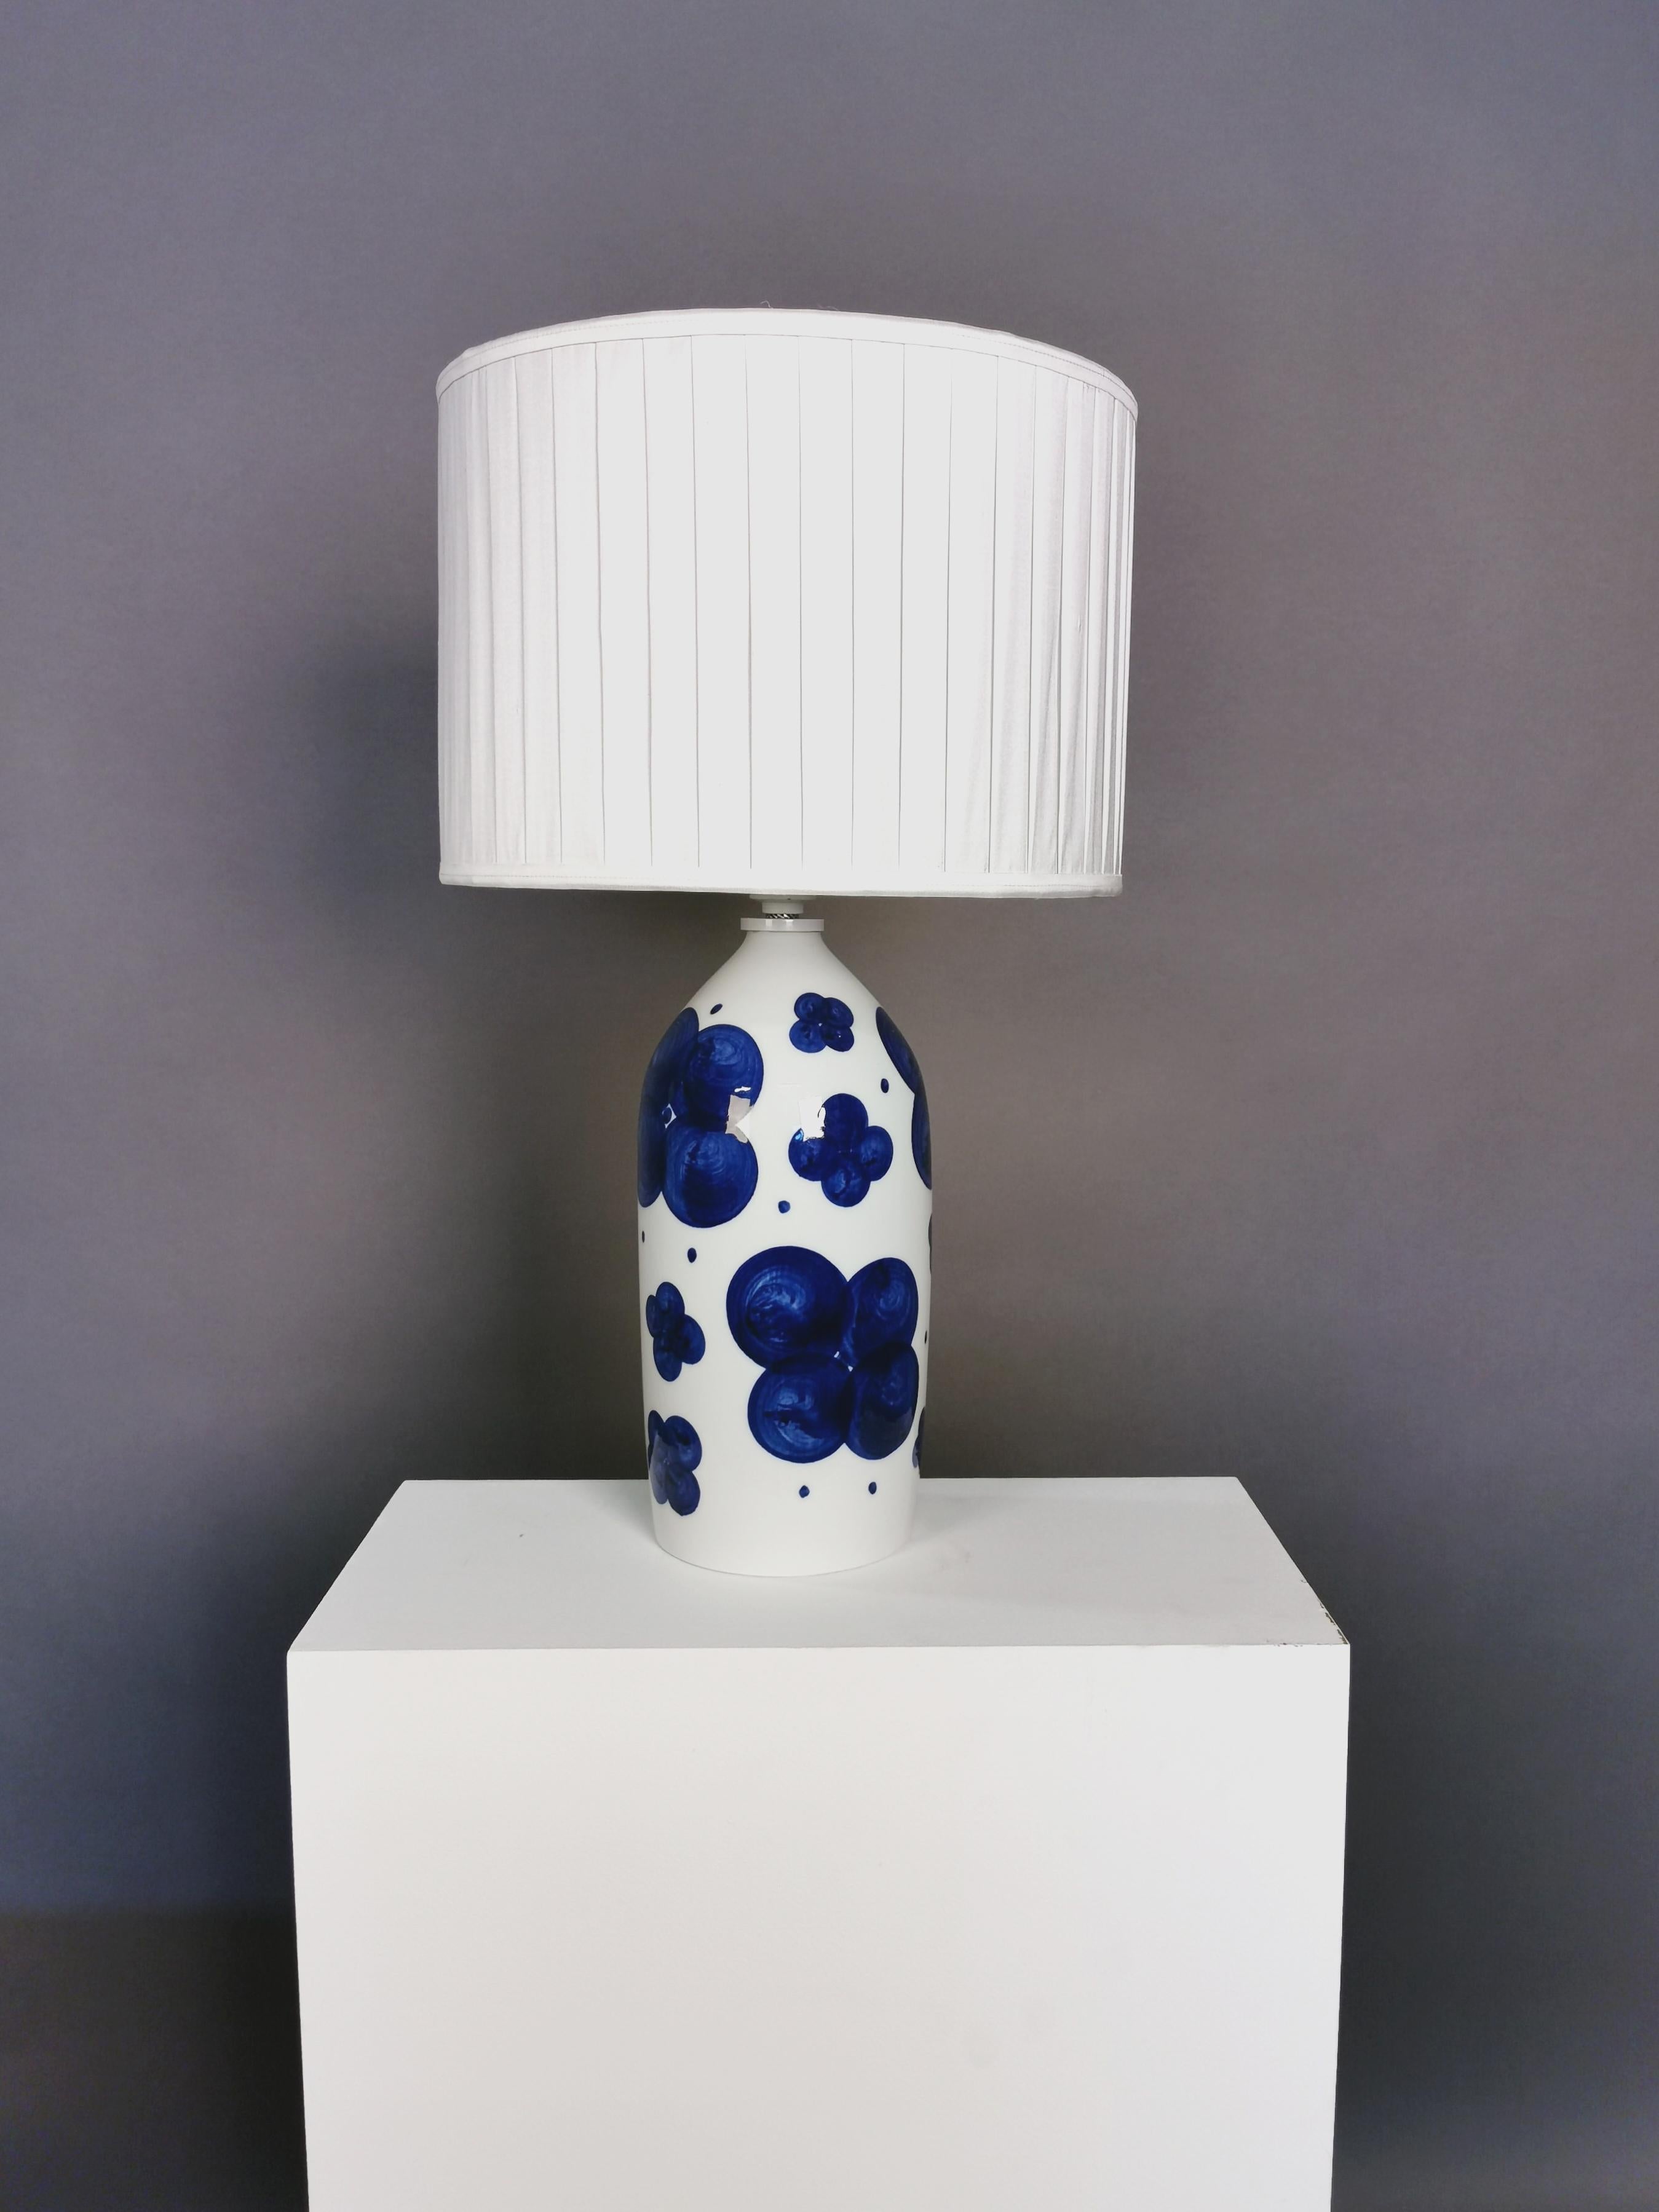 A pair of glazed ceramic table lamps by Swedish artist Sylvia Leuchovius.
New handmade plissé shades in silk with top diffuser. Rewired.
Manufactured by Rörstrand.
Signed.
Measures: 40cm high without the shades.
 